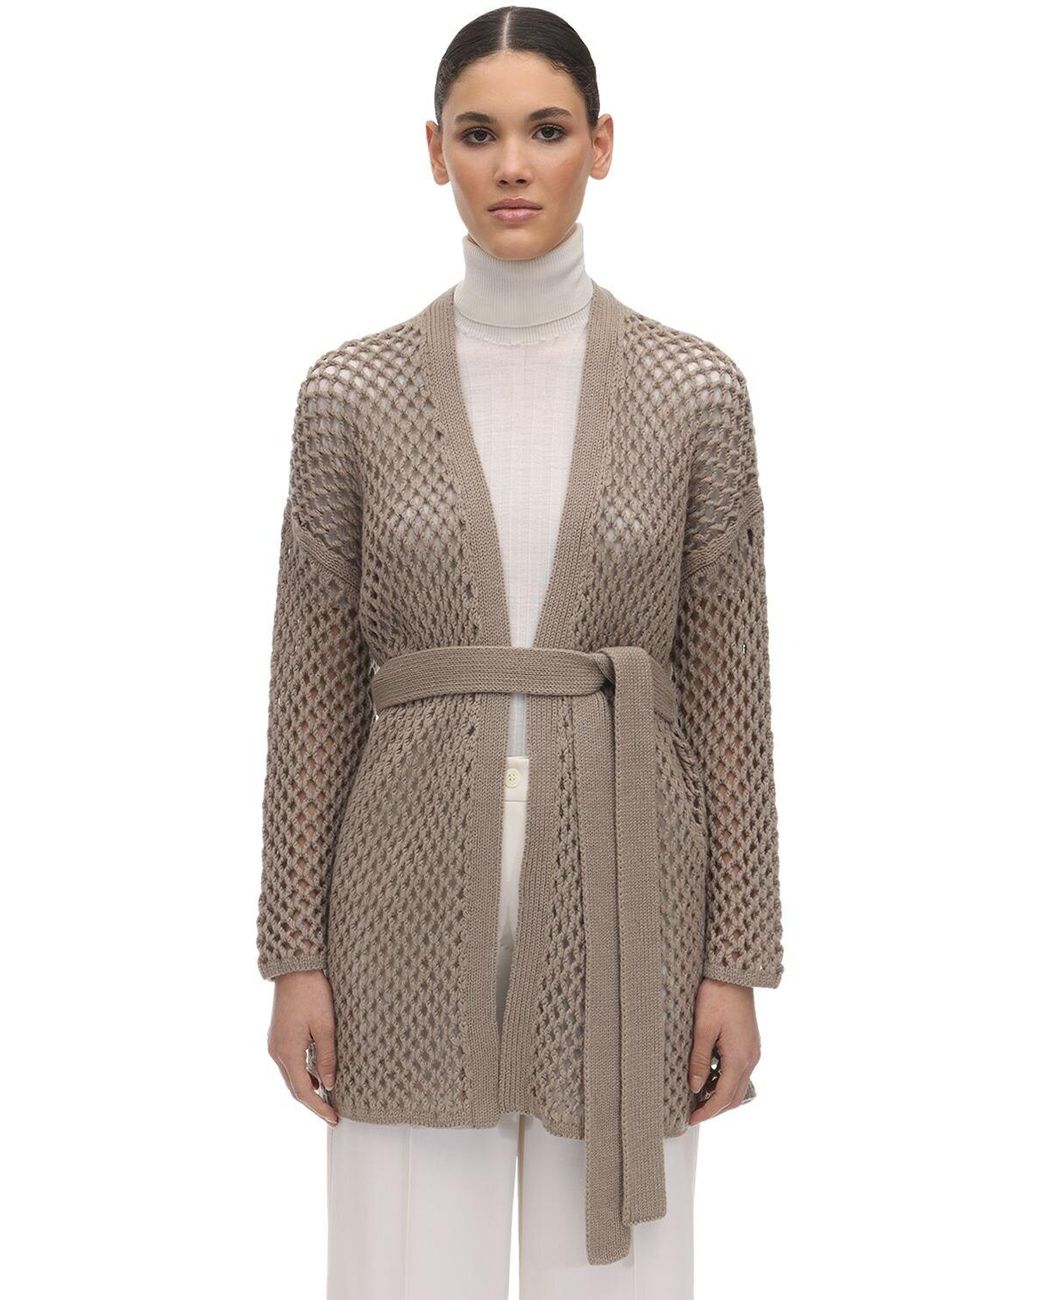 Agnona Belted Cashmere Knit Cardigan in Beige (Natural) - Lyst